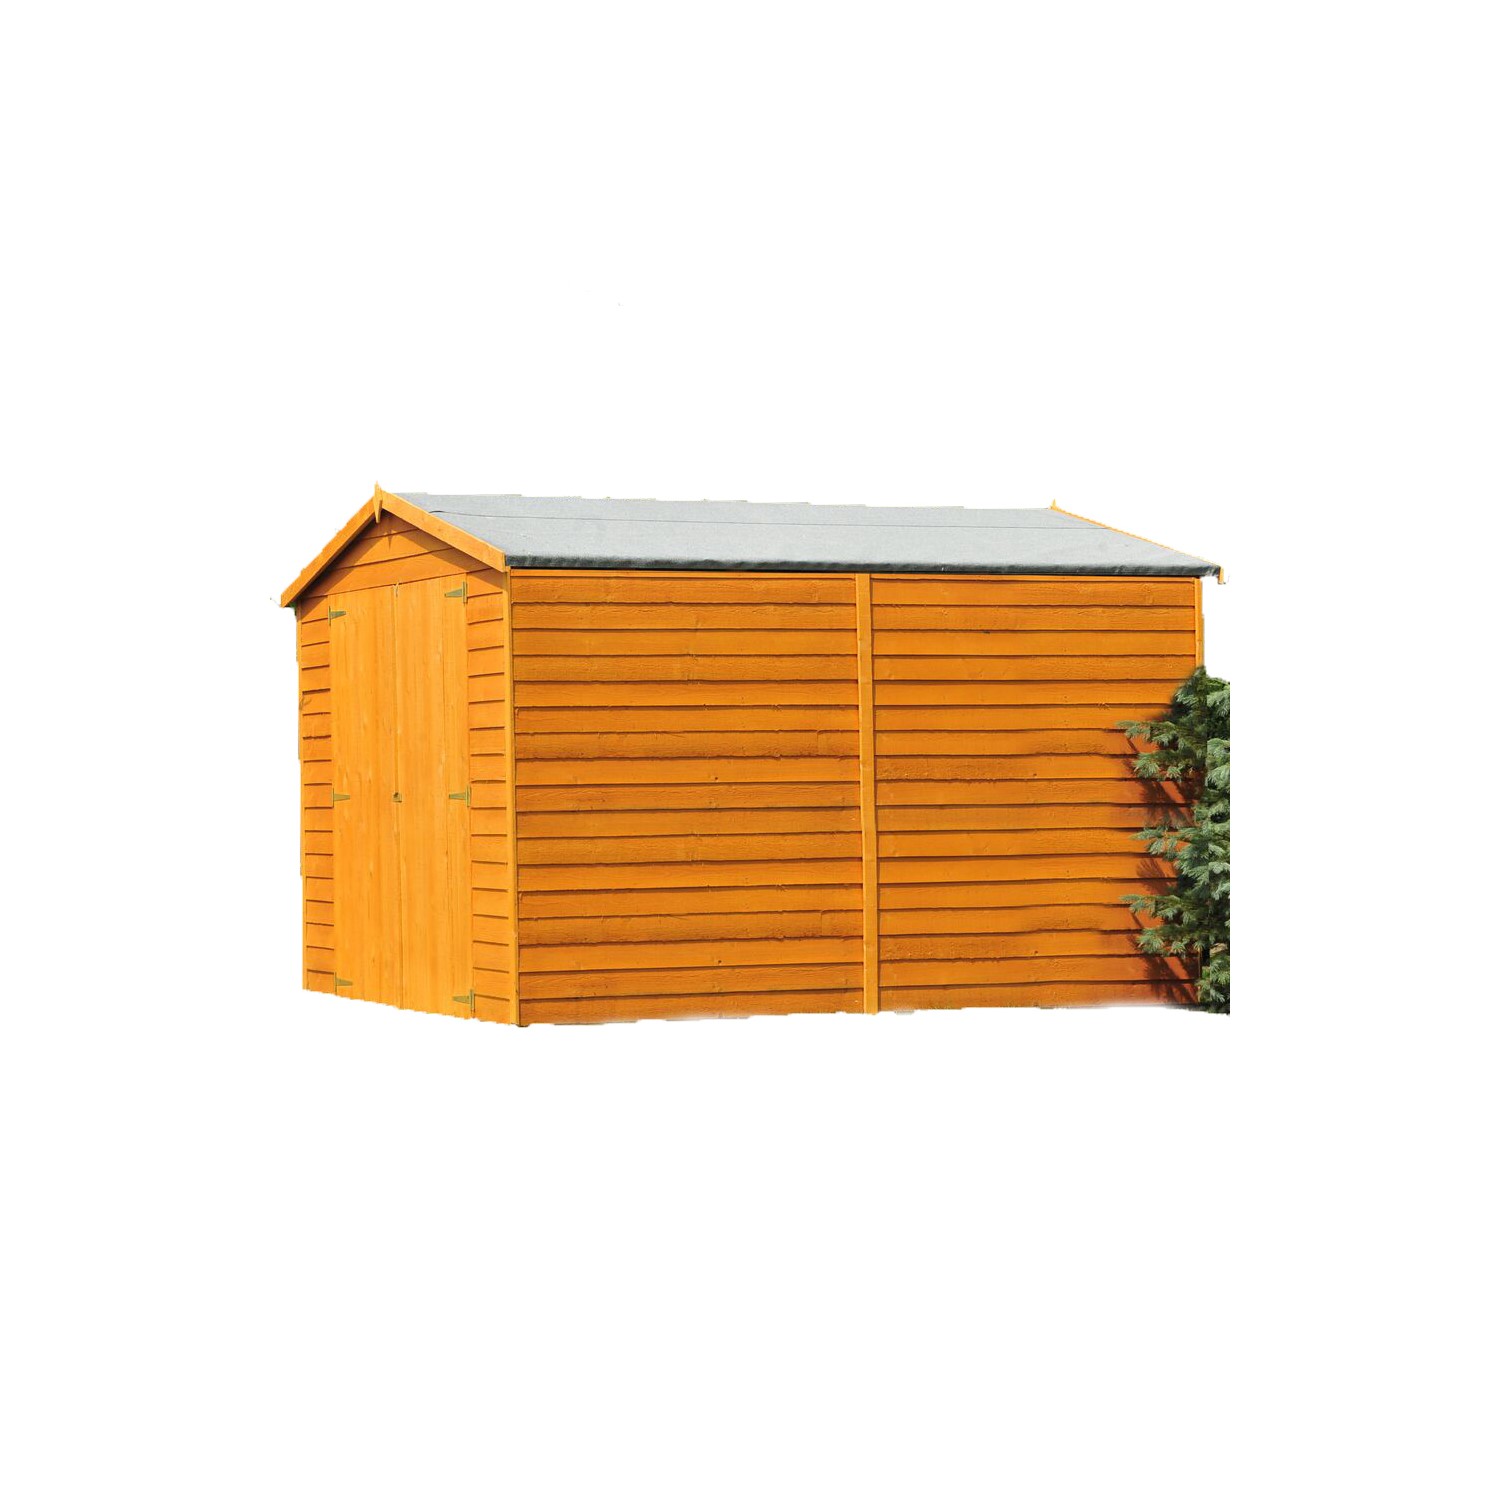 Read more about Shire overlap apex garden shed with double doors 10 x 8ft